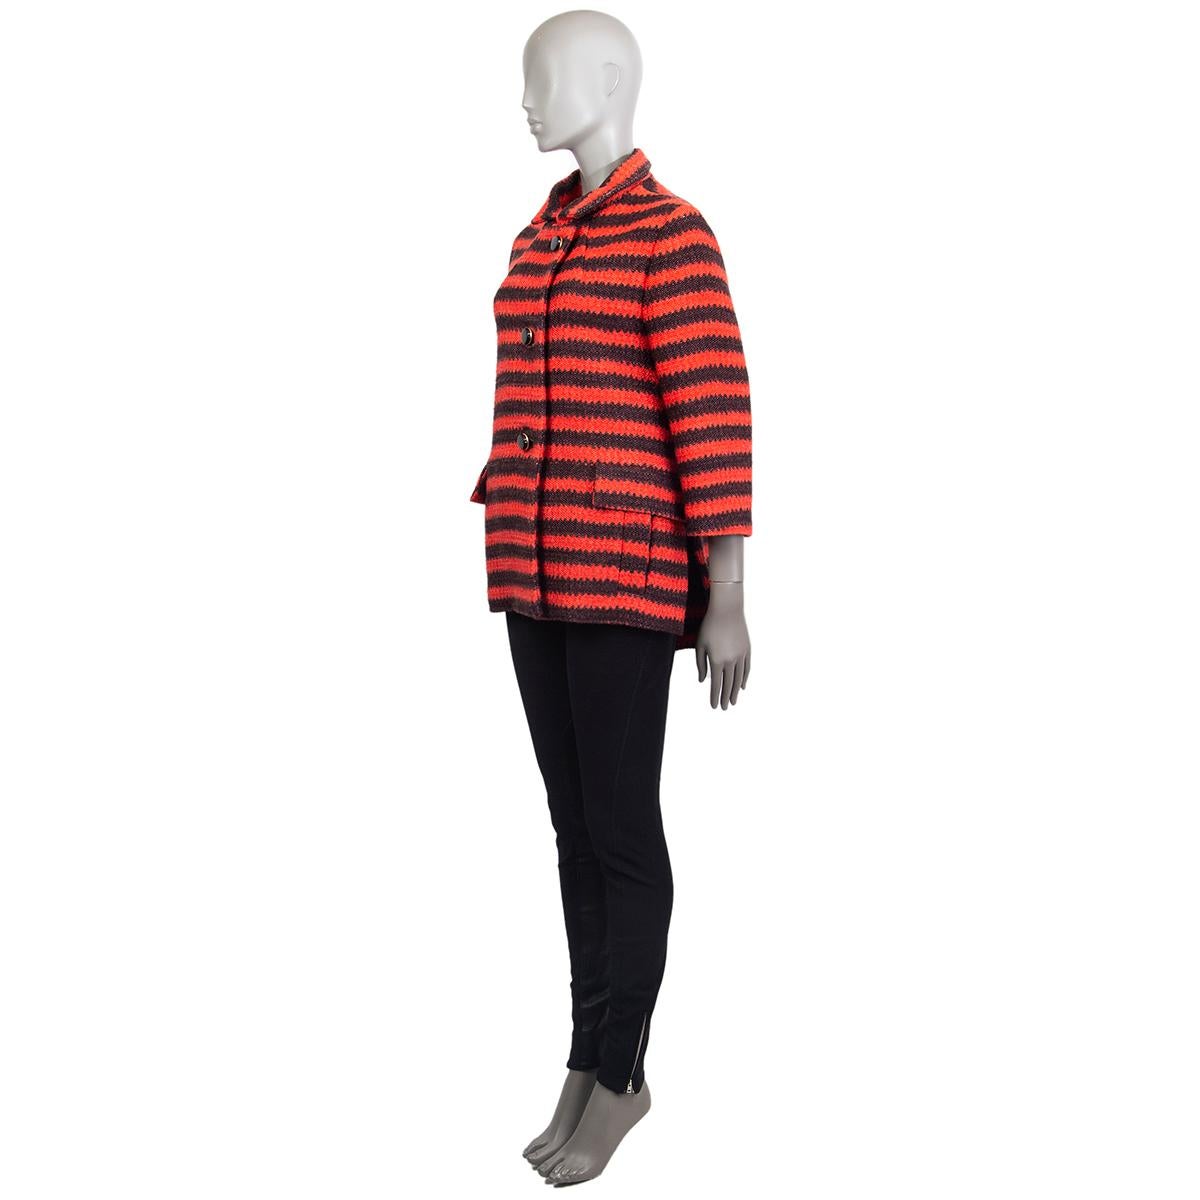 Black MARNI black & coral wool STRIPED 3/4 SLEEVE KNIT Peacoat Coat Jacket 40 S For Sale